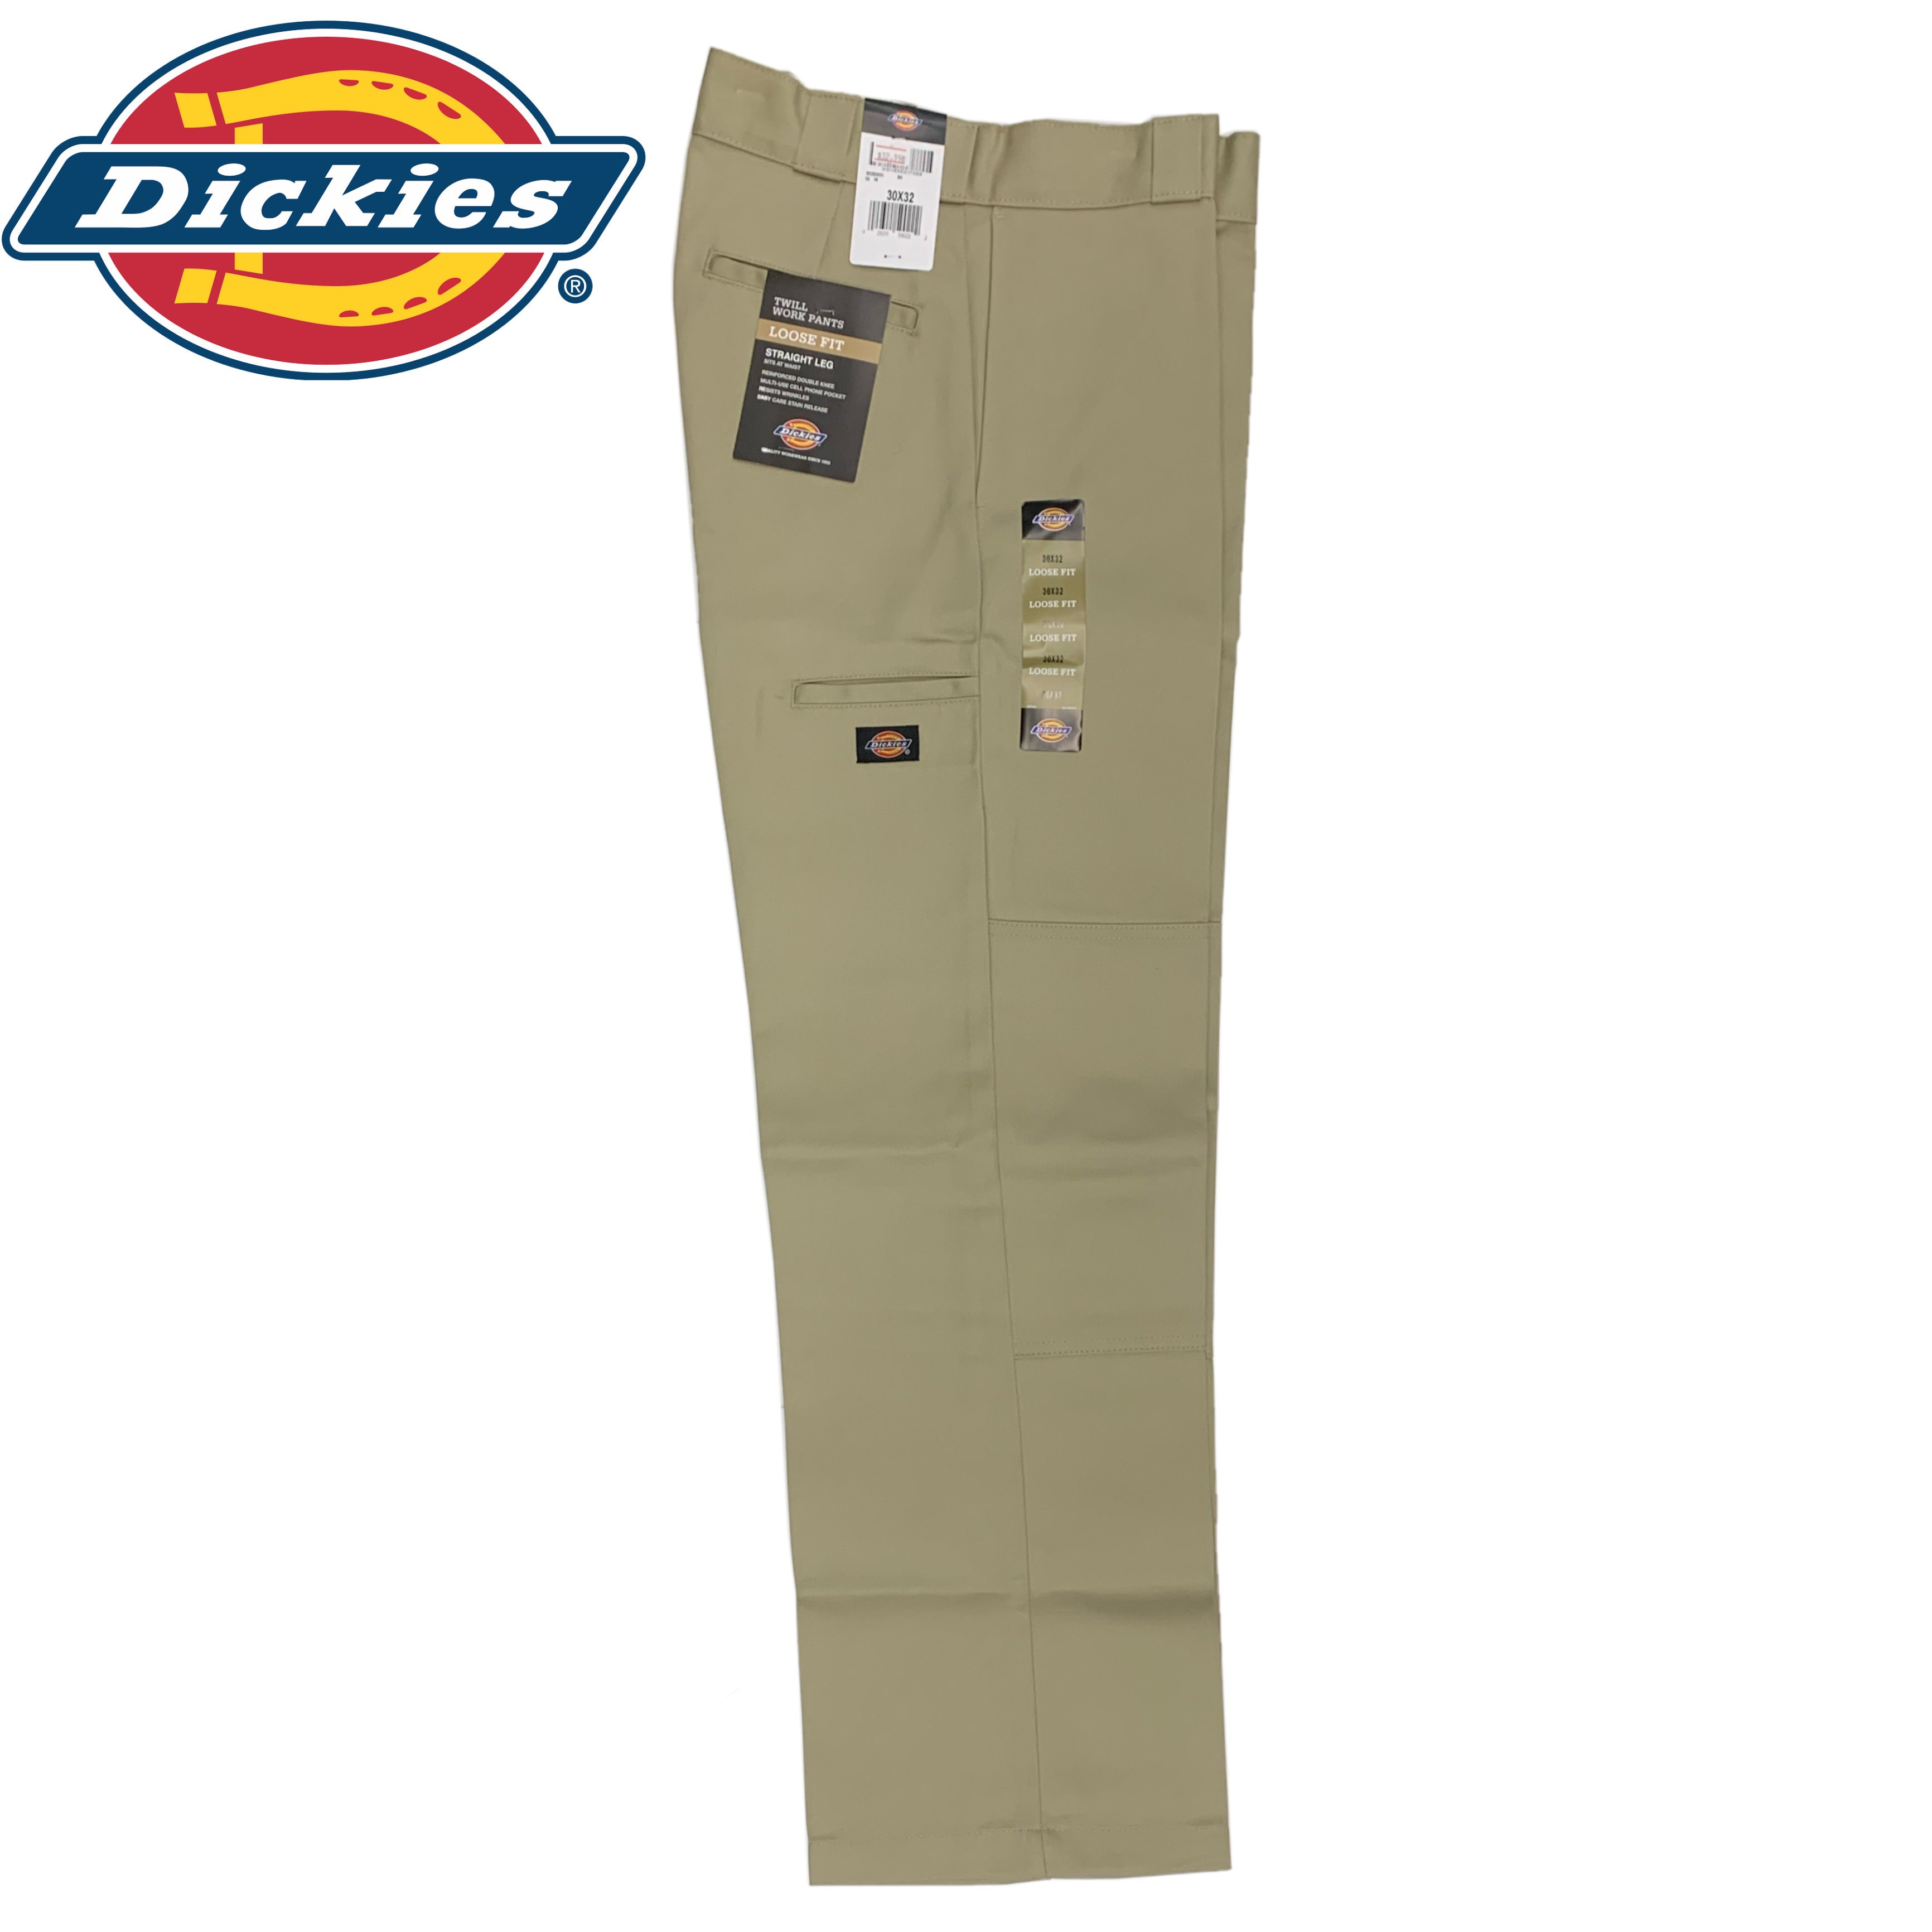 Dickies Loose Fit Double Knee Work Pants Charcoal Khaki White Size 28 or 32